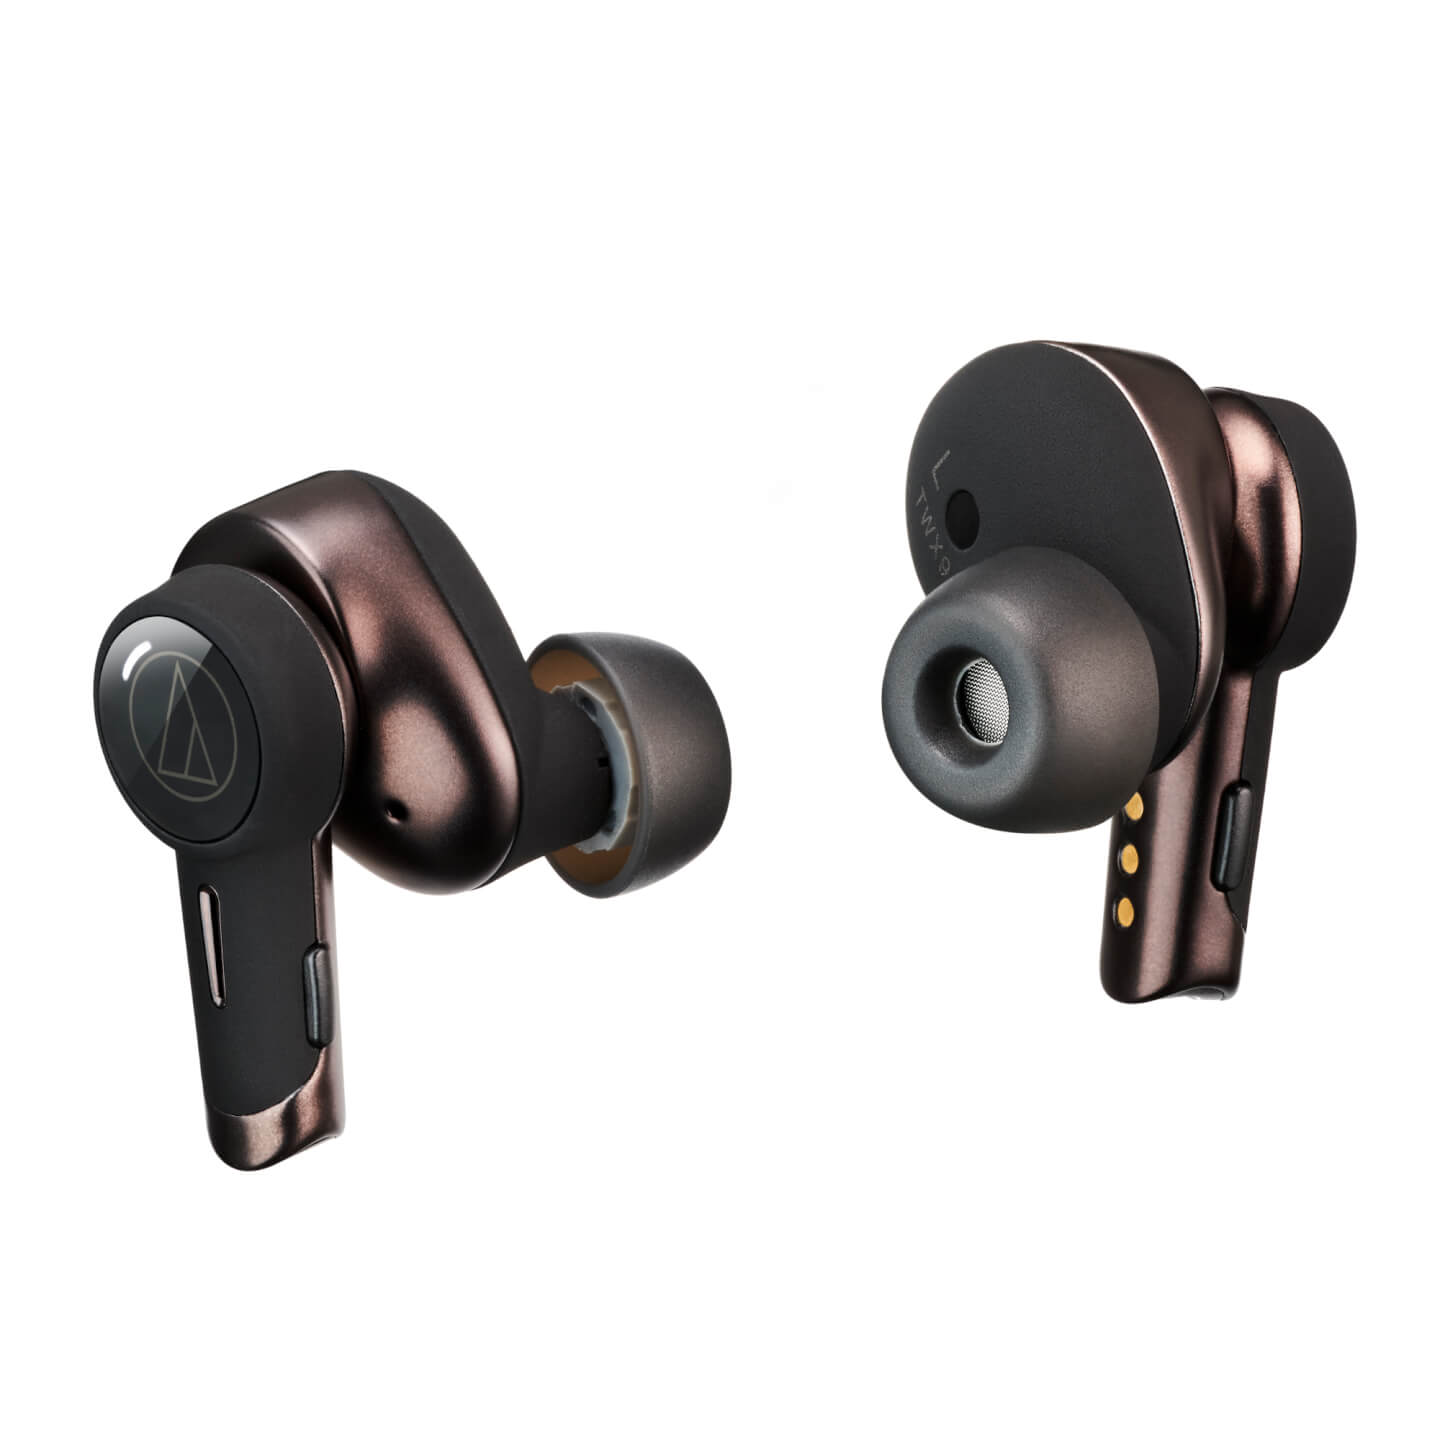 ath twx9 product image earbuds (4)